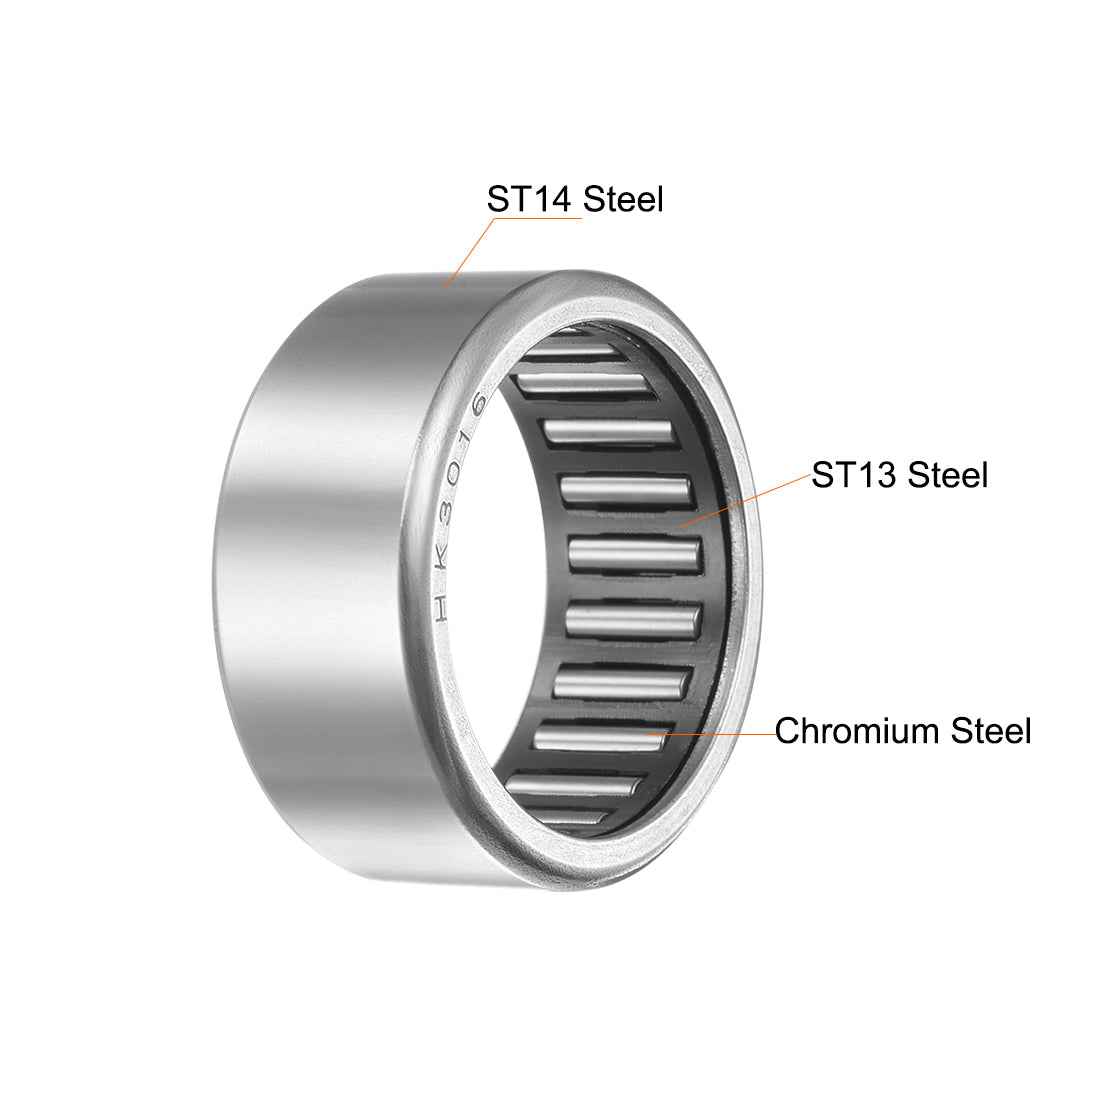 uxcell Uxcell HK Series Needle Roller Bearings, Open End, Stamping Steel Drawn Cup, Metric